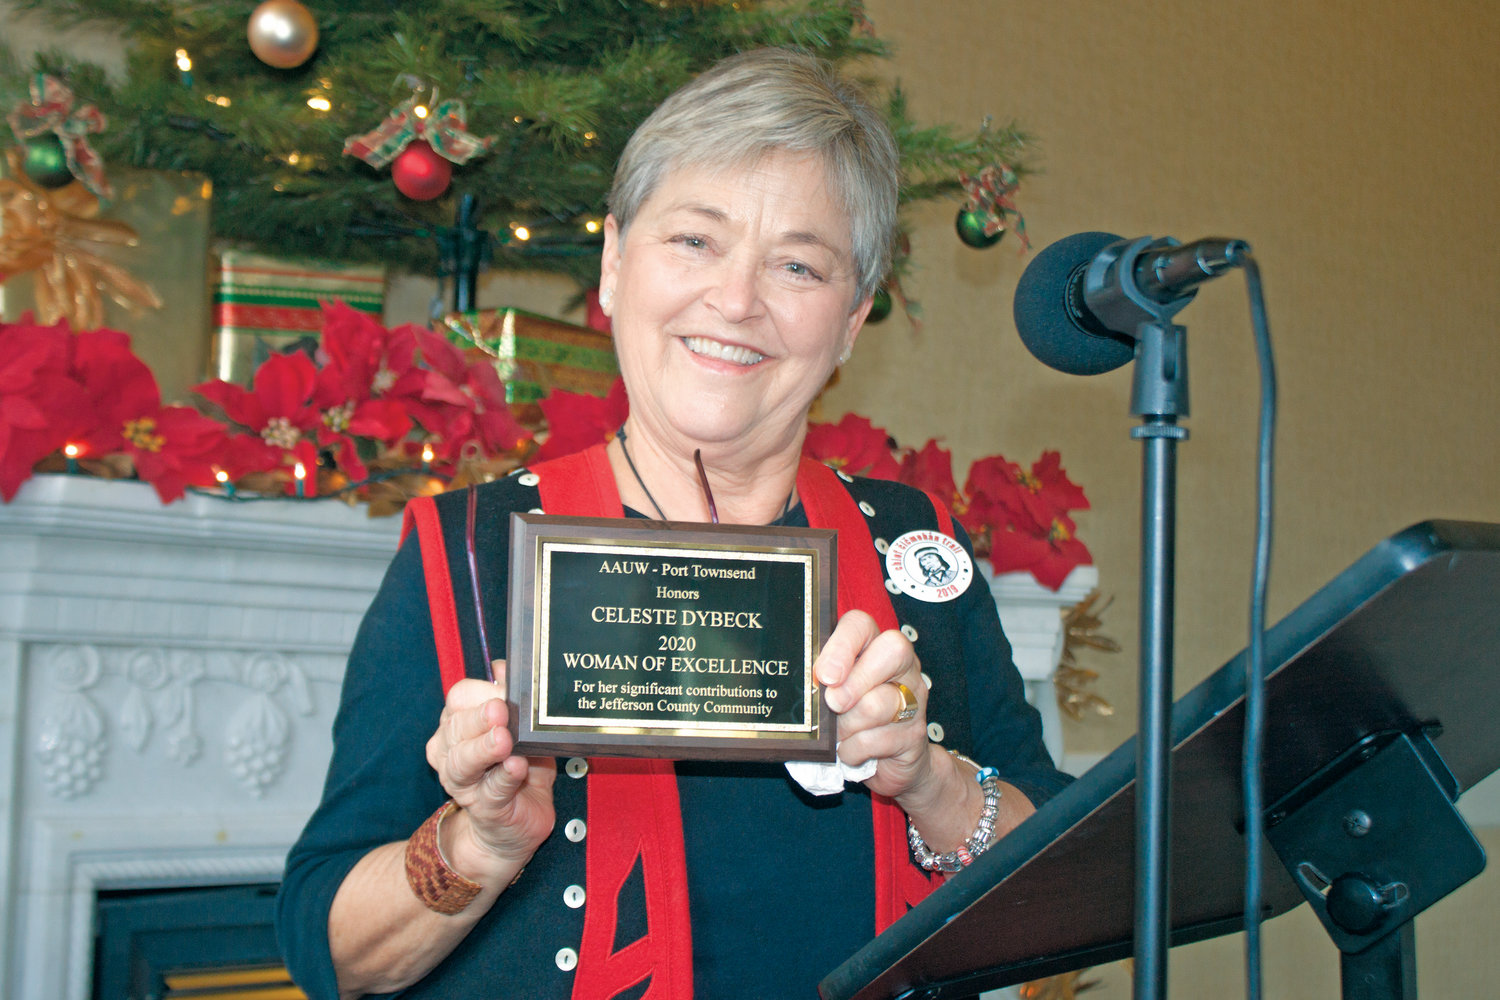 Celeste Dybeck receives her 2020 Woman of Excellence plaque from the American Association of University Women’s Port Townsend branch on Dec. 14.